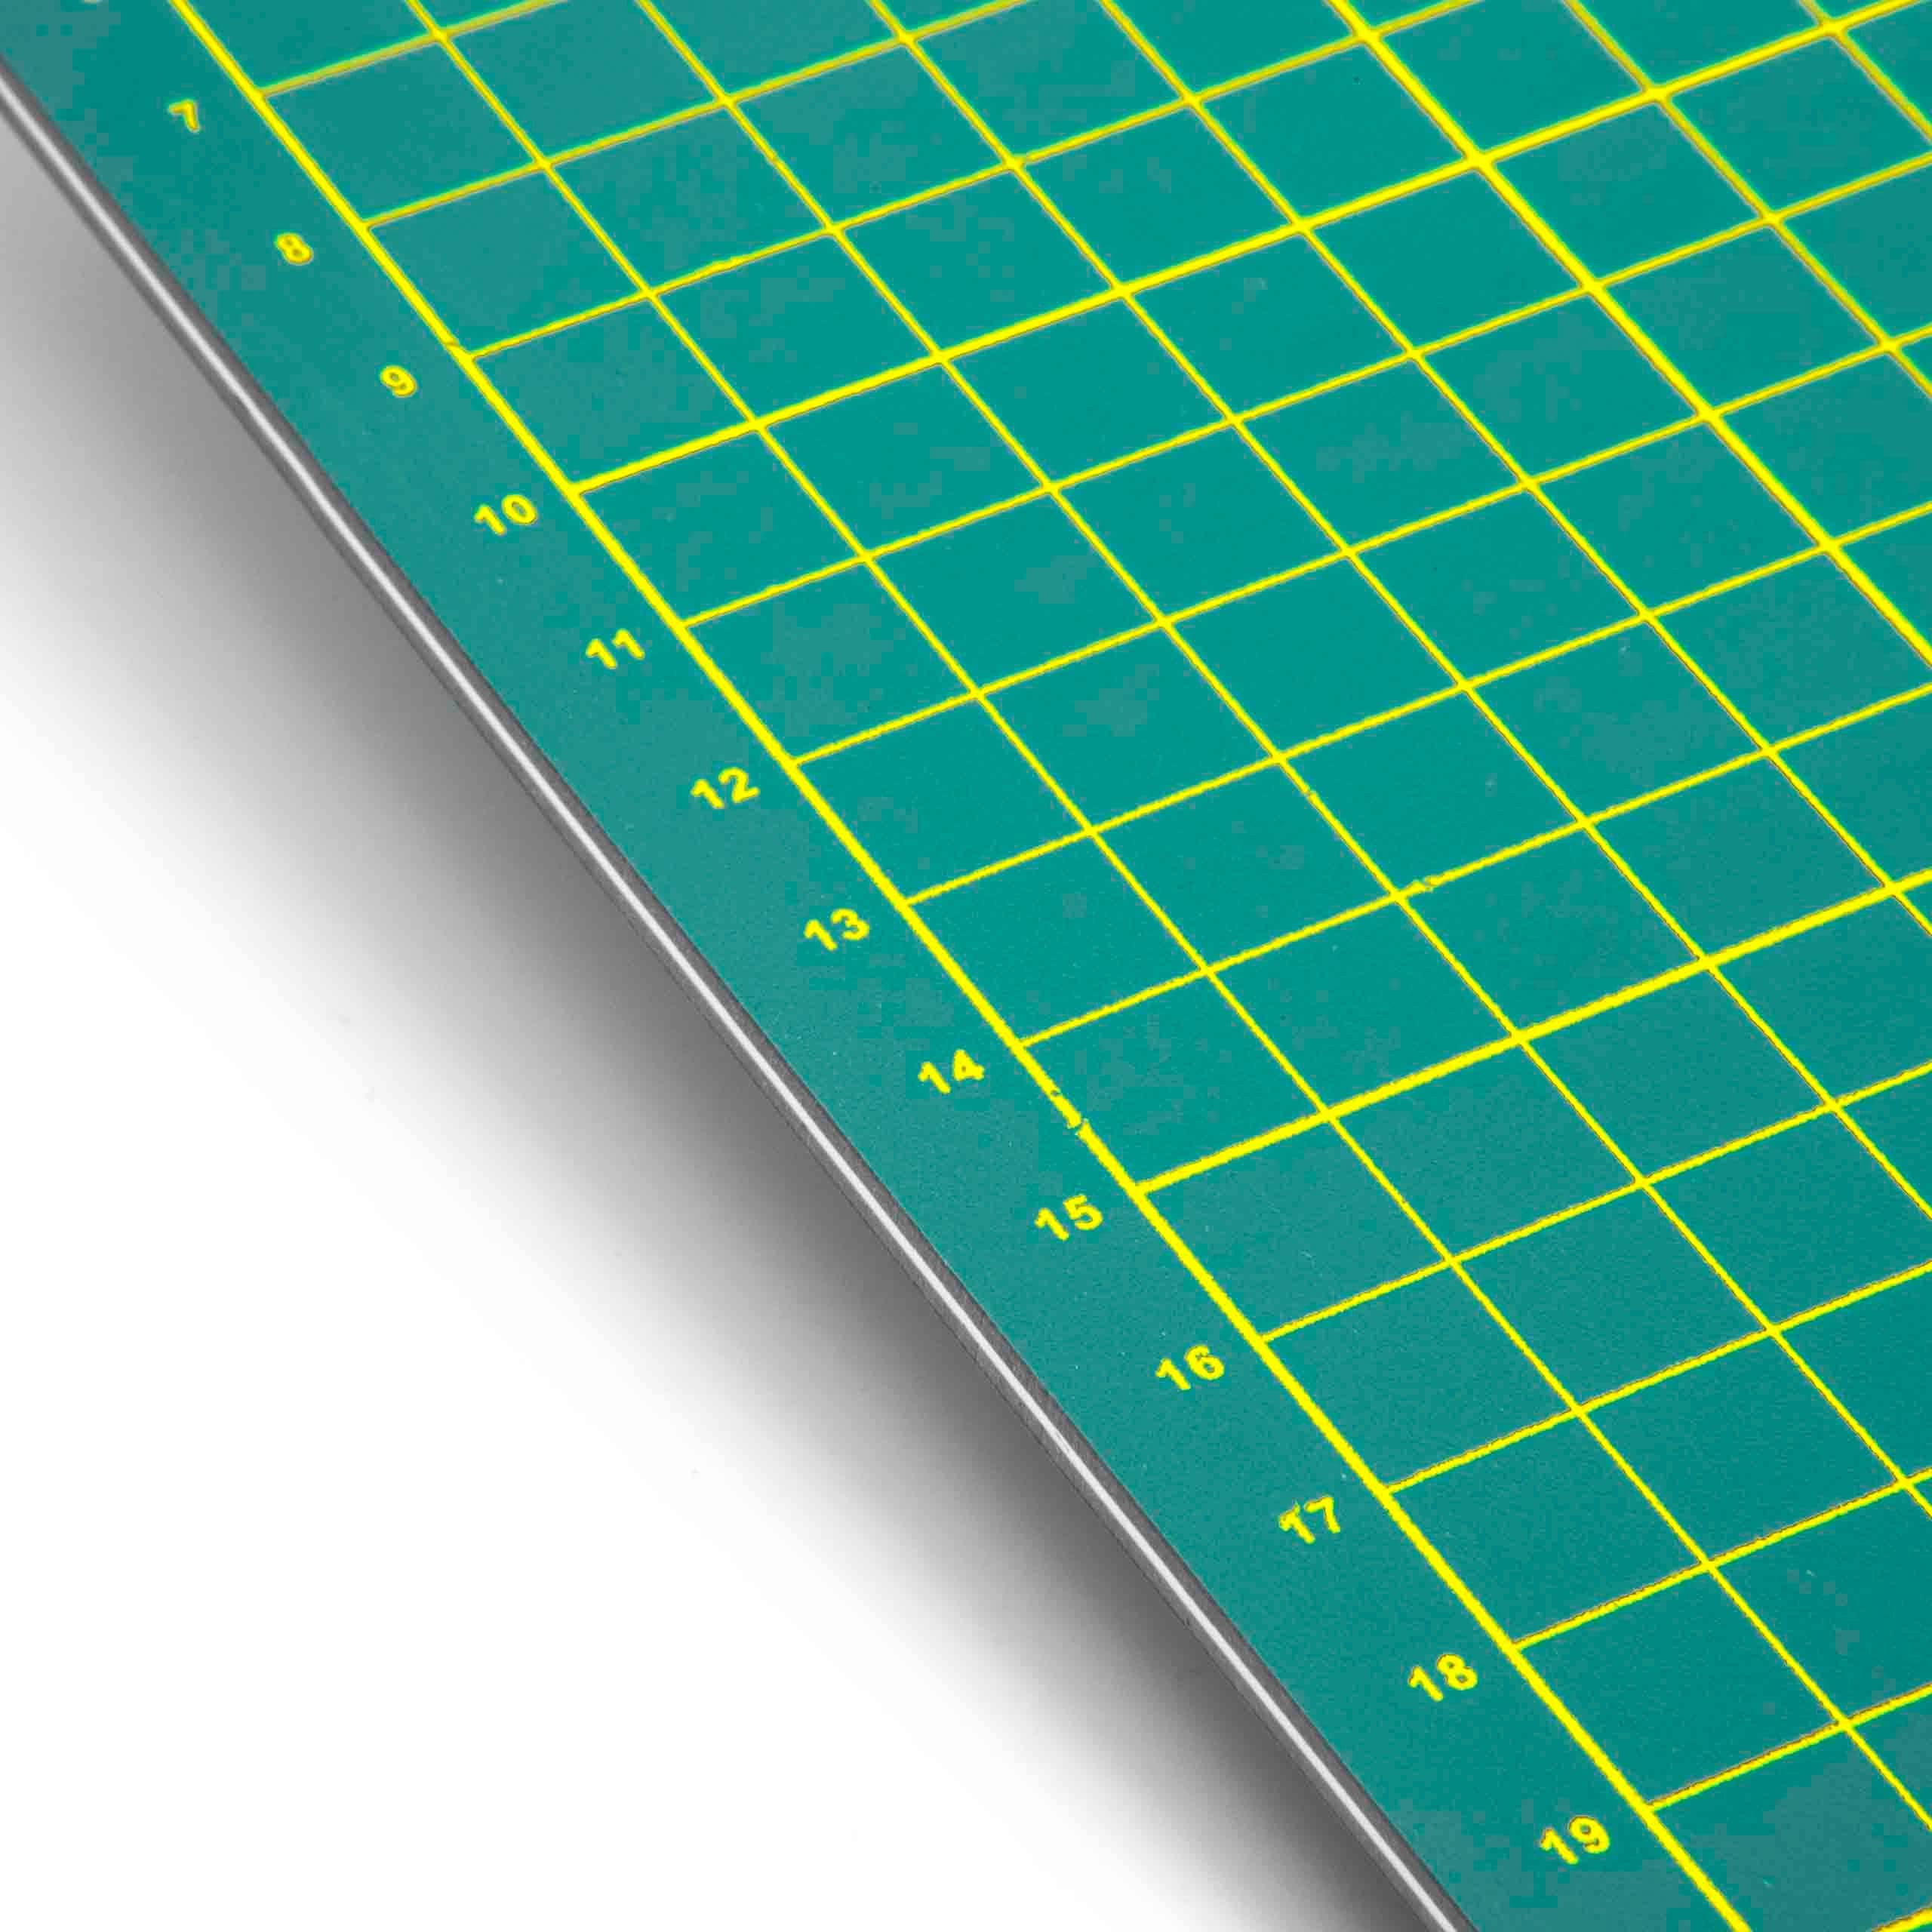 Cutting Mat - A4 Working Surface, 30 x 22 cm, Self-Healing, With Grid, Double-Sided